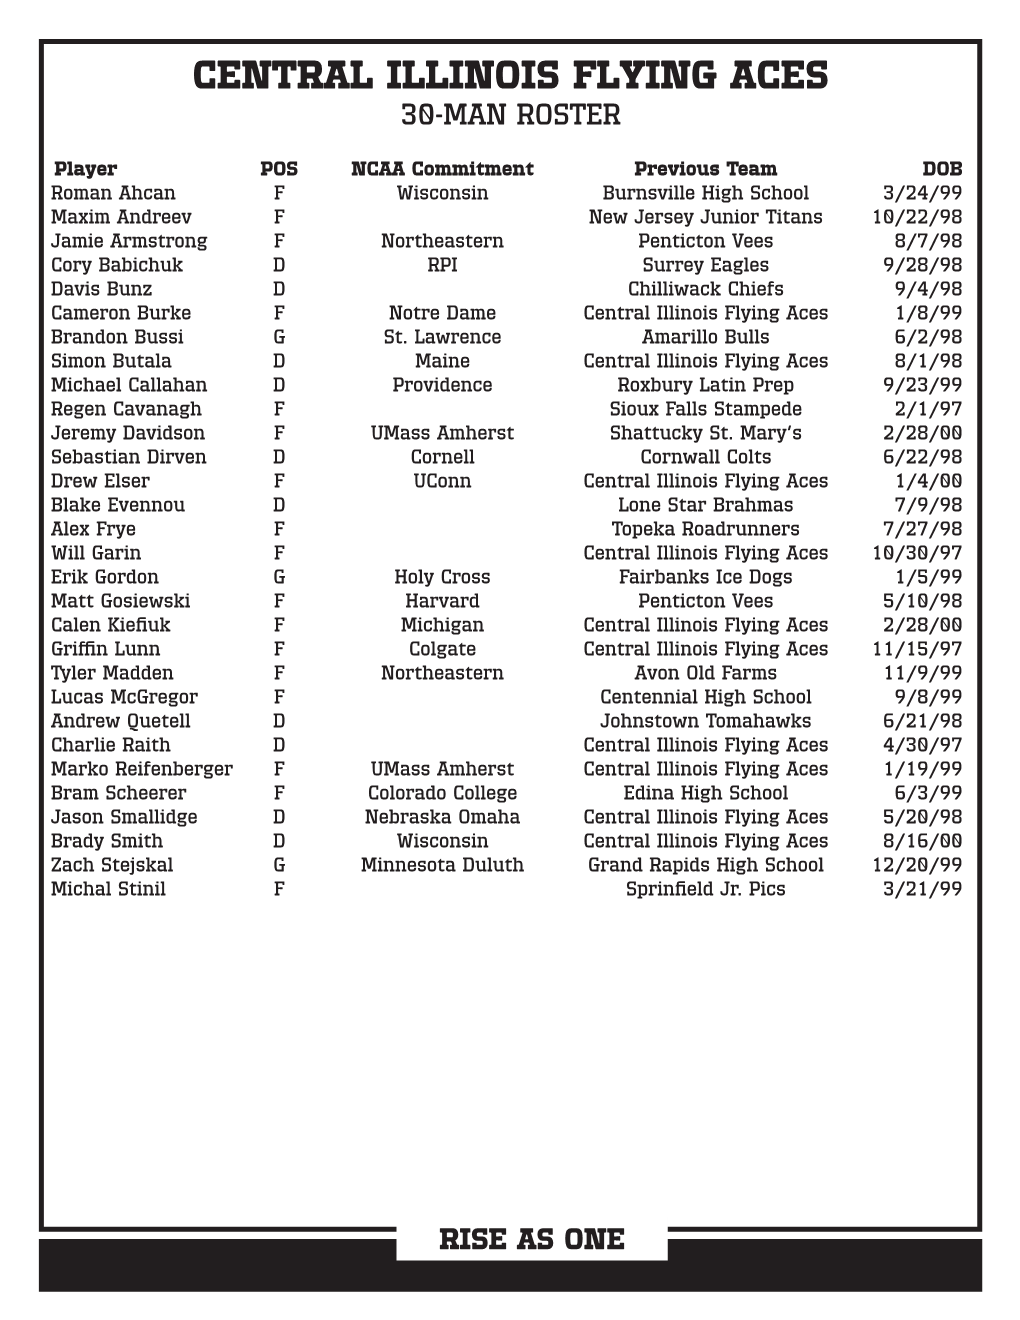 Central Illinois Flying Aces 30-Man Roster